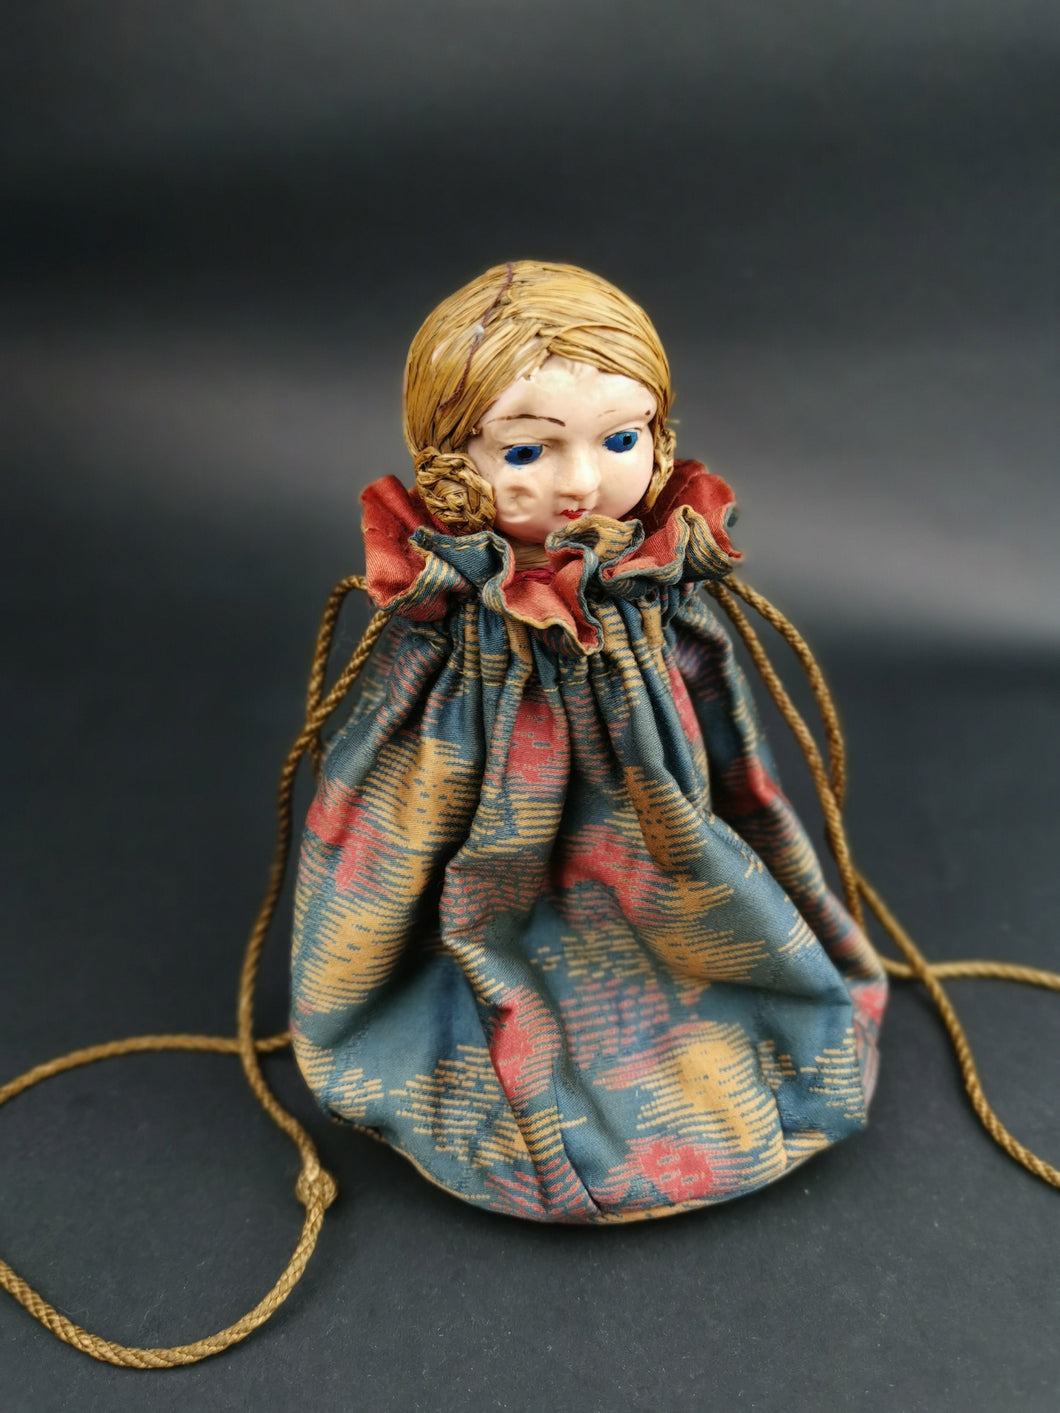 Vintage Pouch Purse with Celluloid Flapper Doll Inside Drawstring Bag 1920's Original